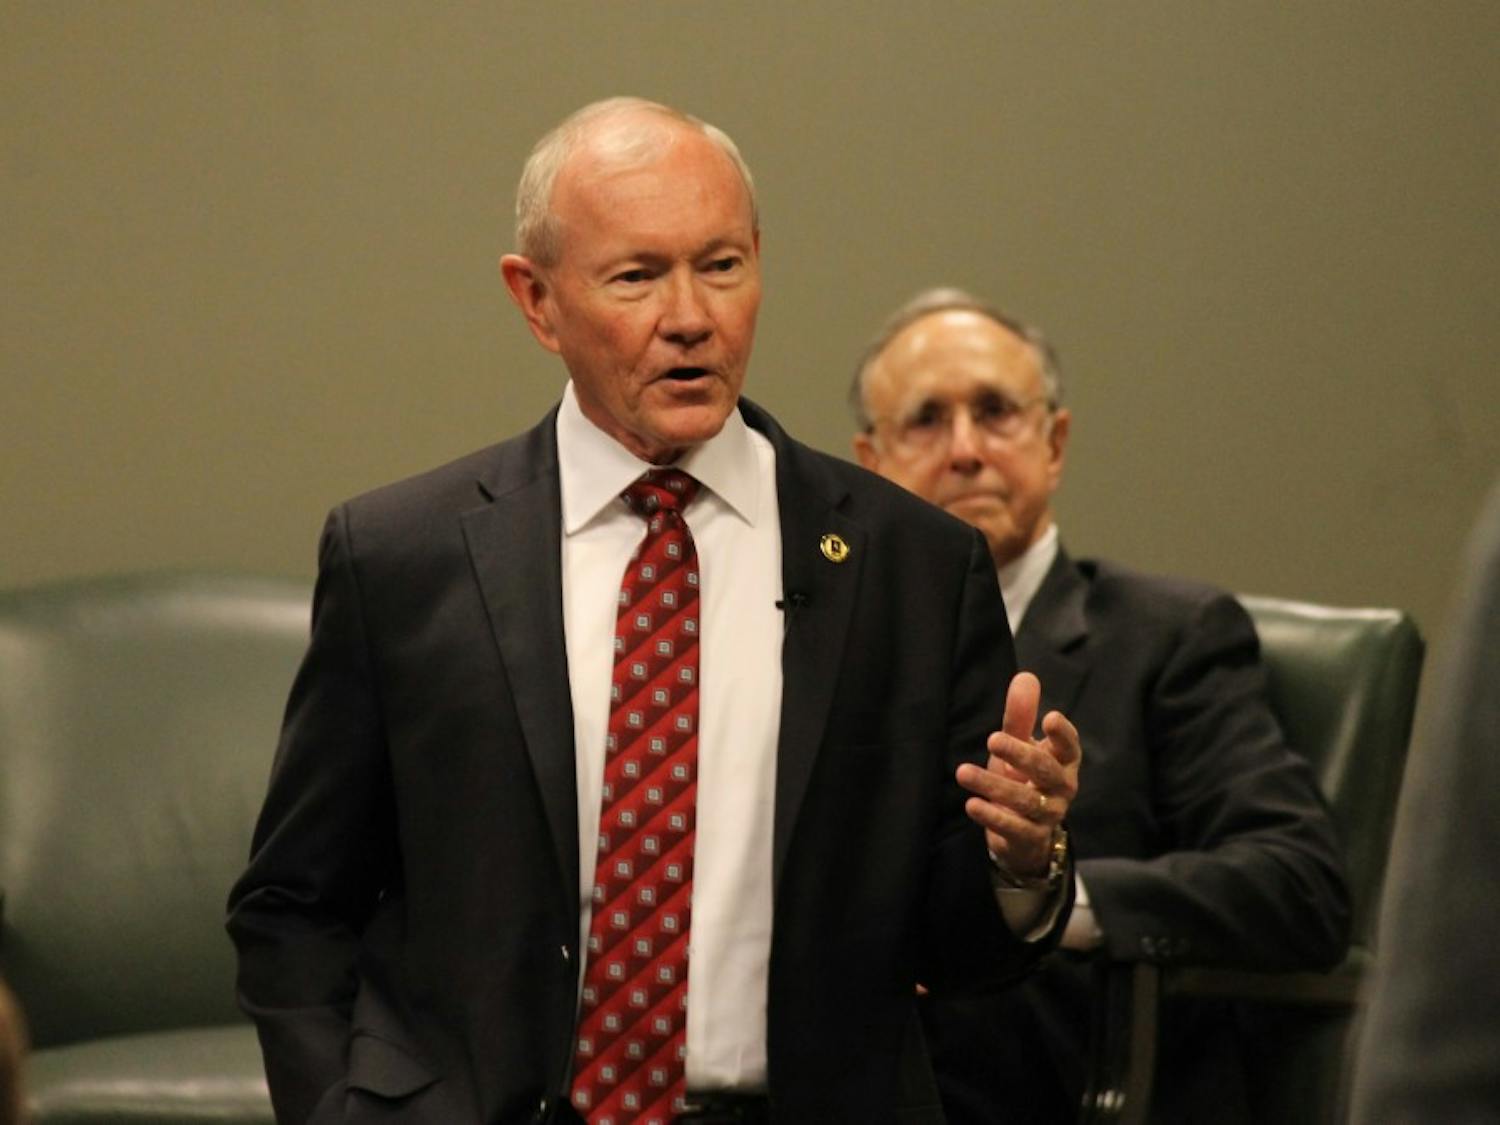 General Martin Dempsey, former Chairman of the U.S. Joint Chiefs of Staff, discusses U.S. national security at a forum with Professor Richard Kohn and Professor Klaus Larres on Tuesday evening in Wilson Library.